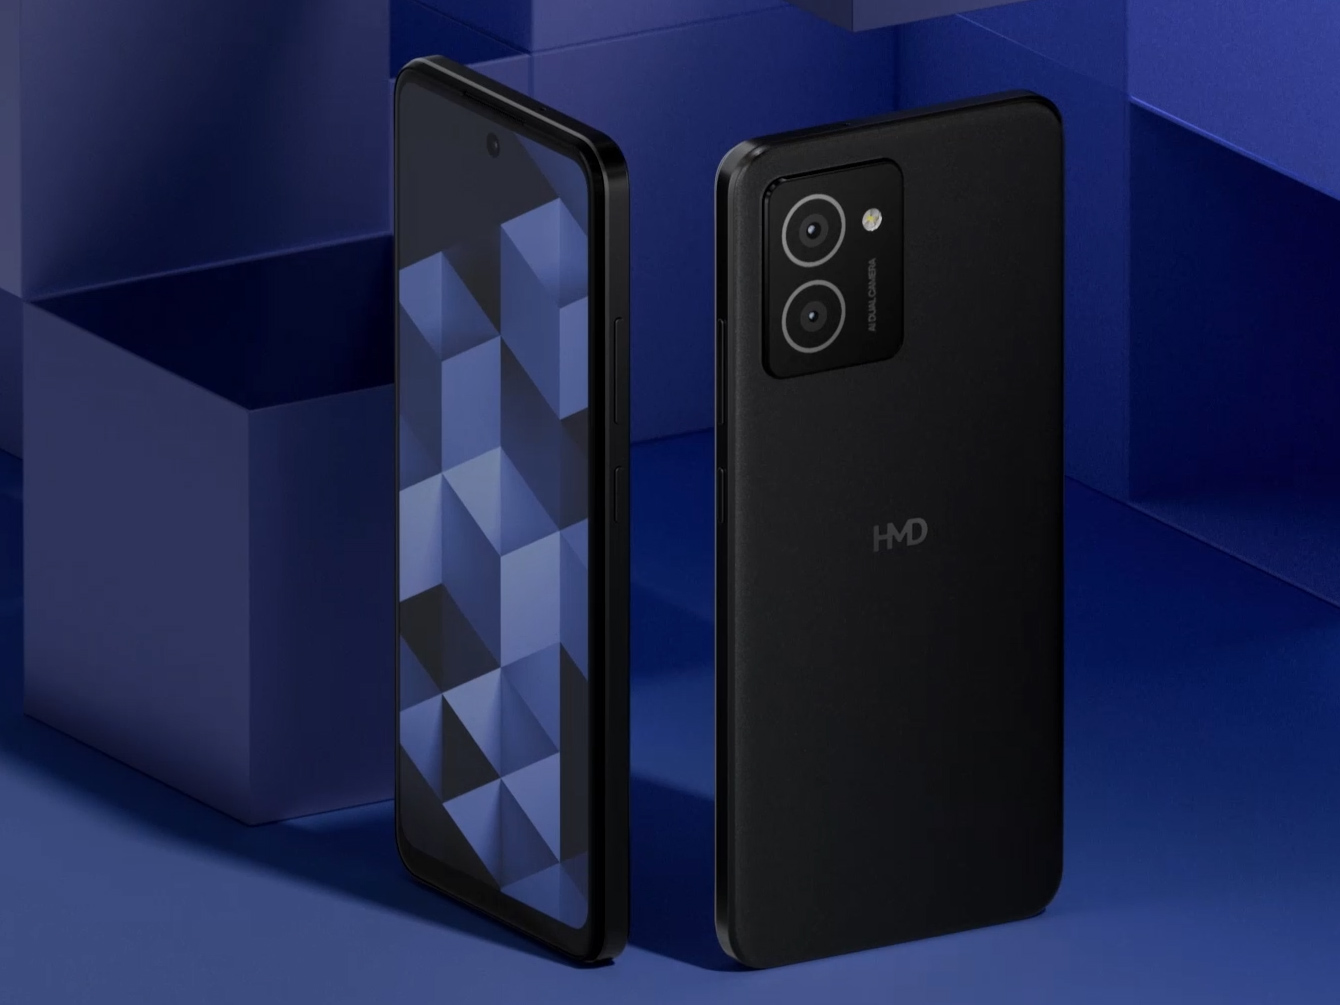 HMD’s first self-branded phones are all under $200